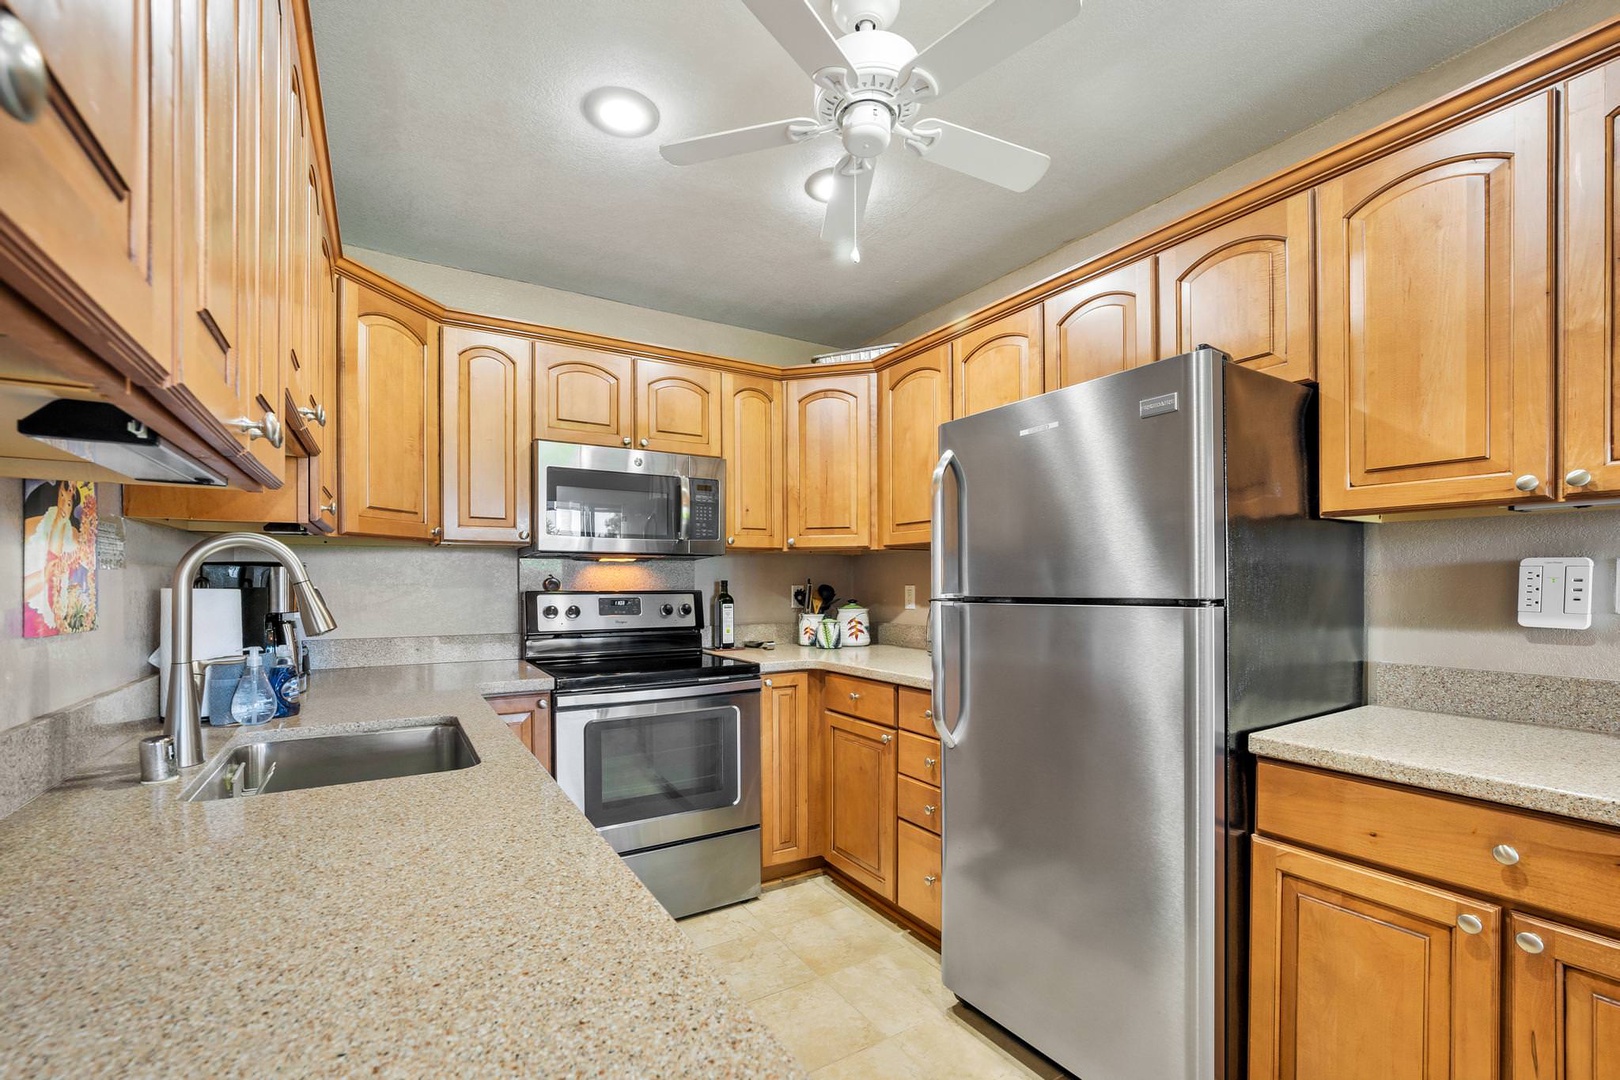 Kitchen with drip coffee maker, blender, toaster, dishwasher, and more